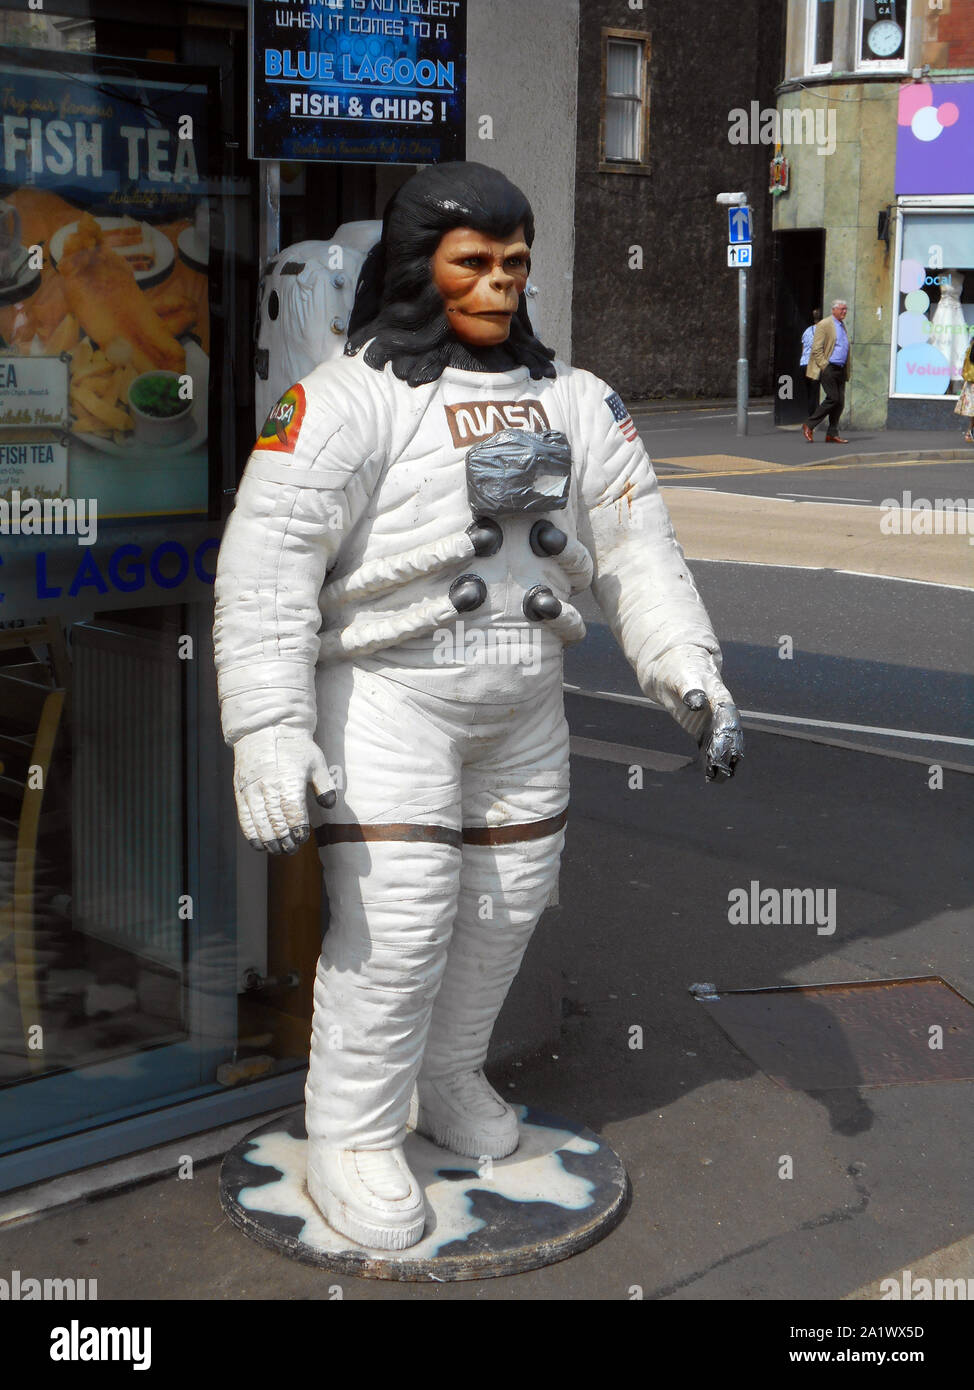 This strange sight of a 'Planet of the Apes' cast member, in a space suit, can be seen outside a fish and chip restaurant in the sea side, holiday town of Largs, on the west coast of Scotland. Alan Wylie/ALAMY © Stock Photo